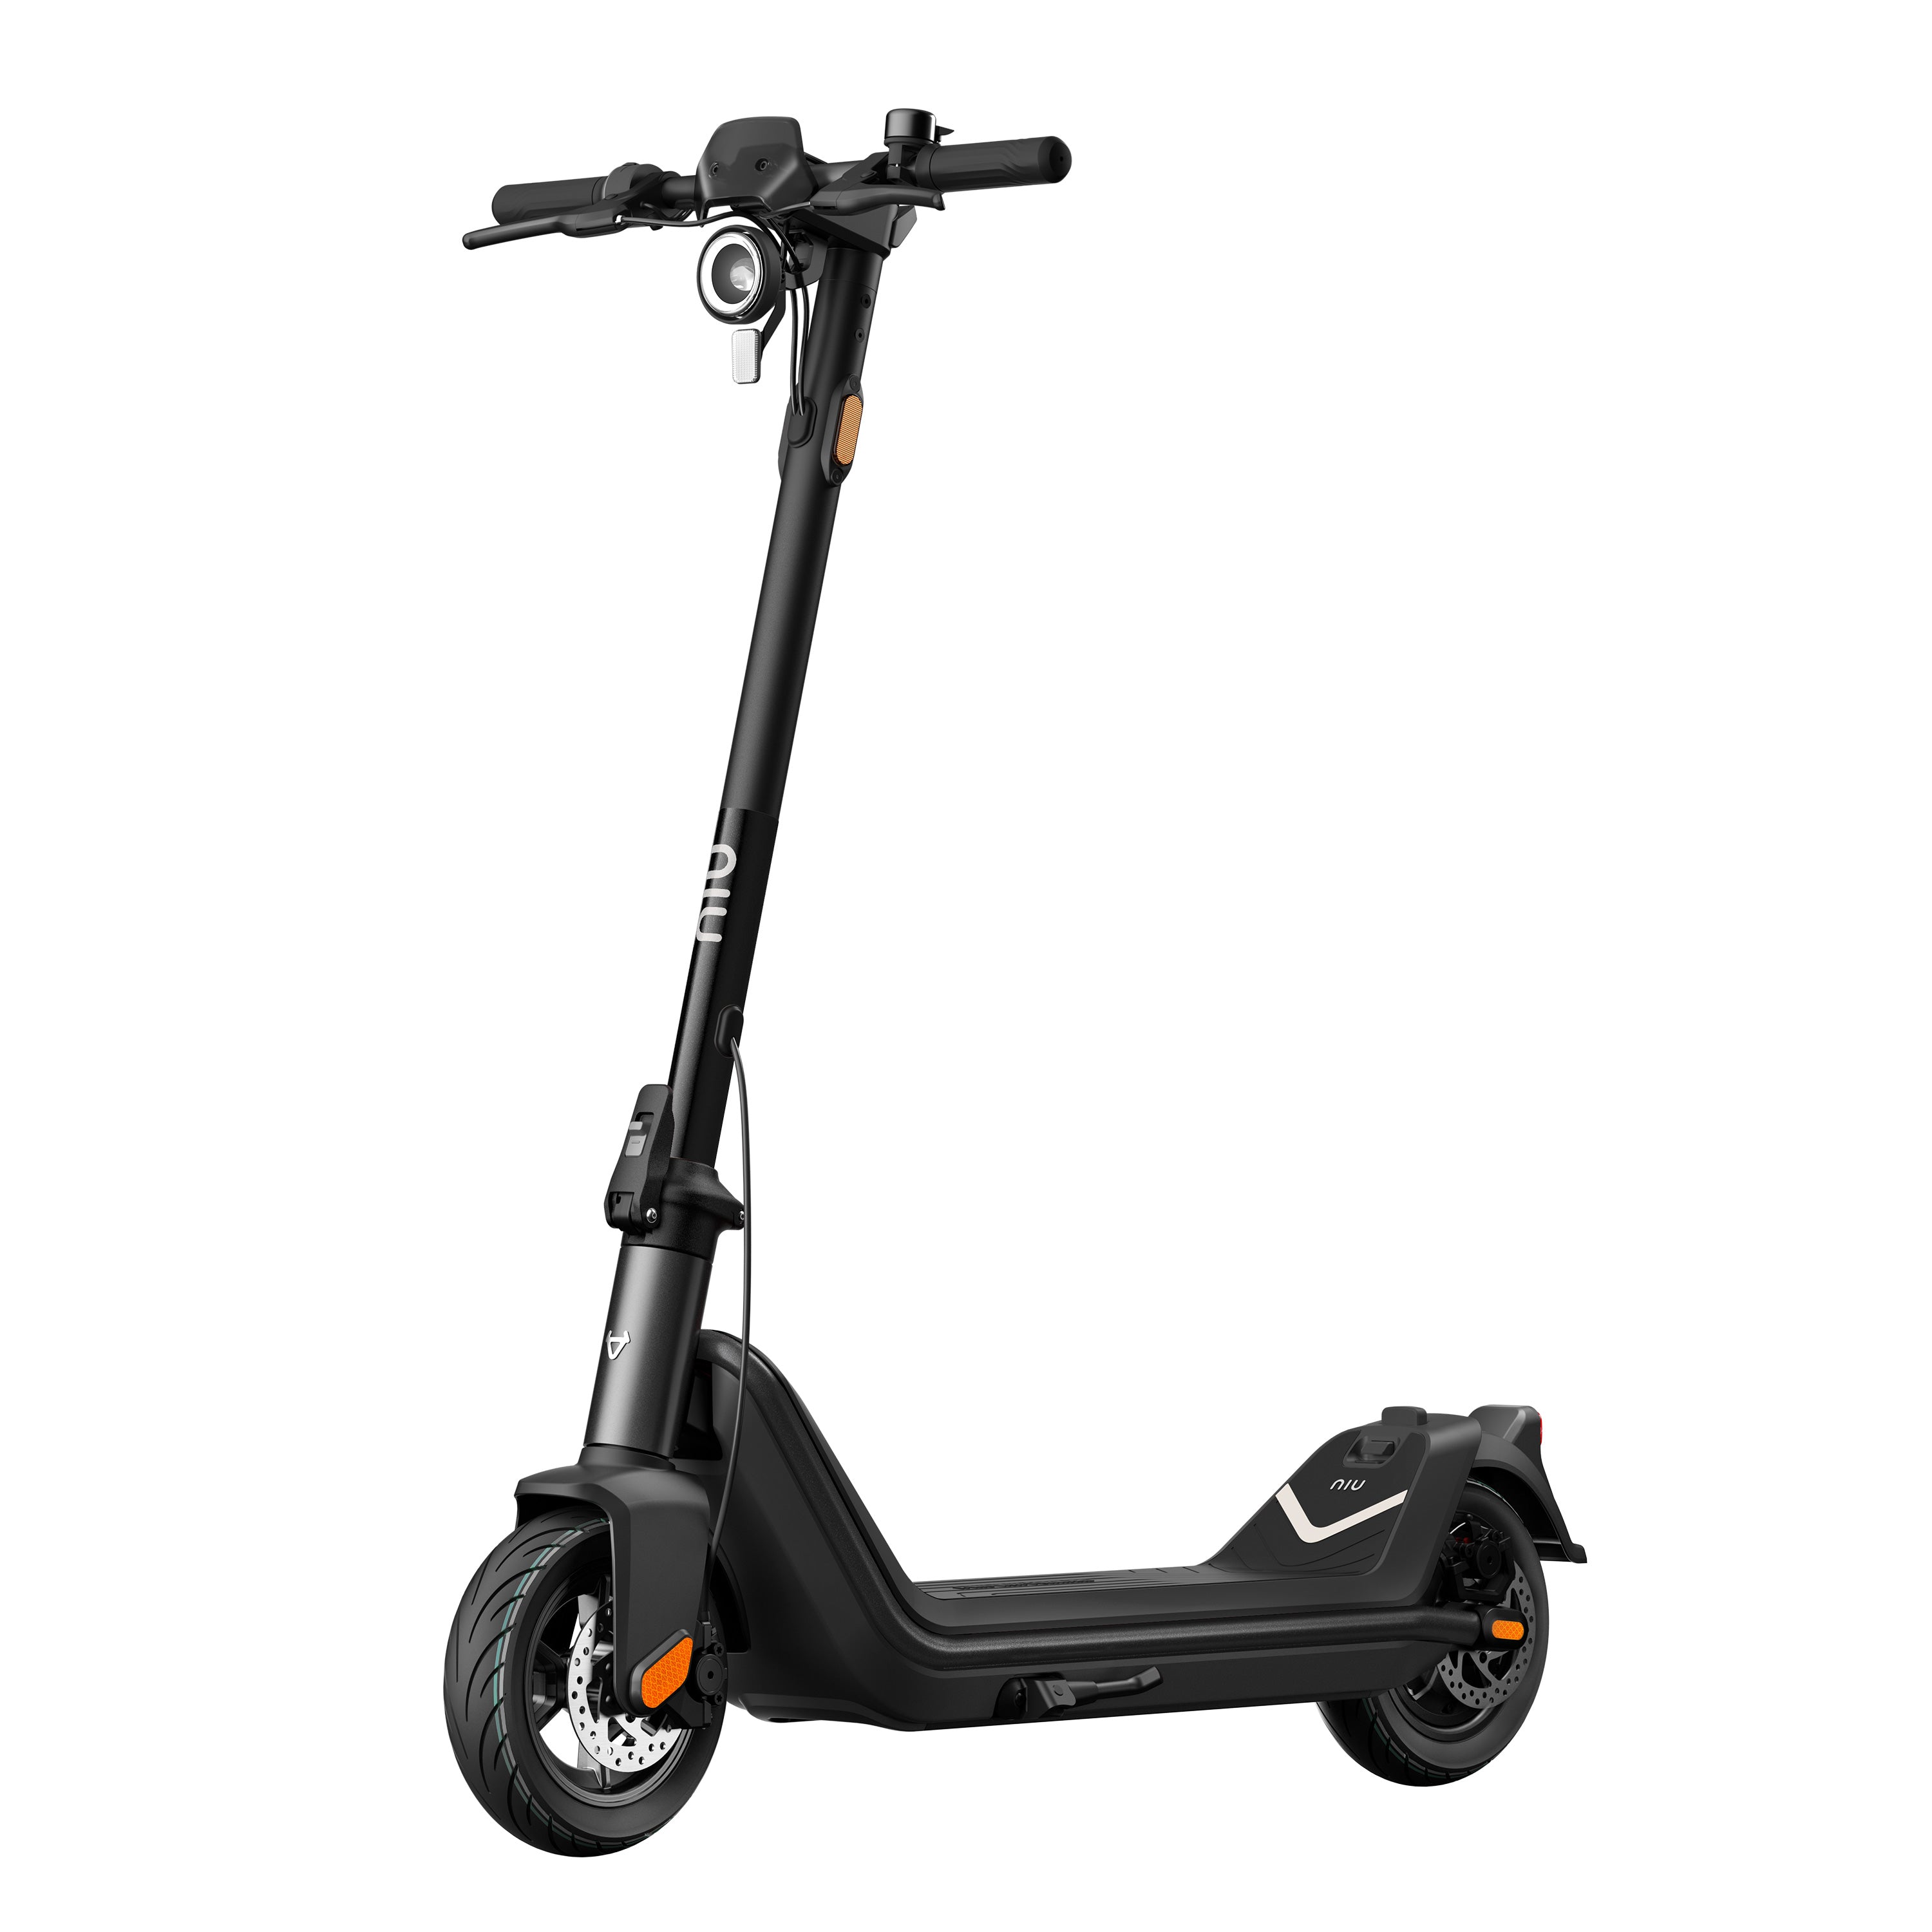 NIU KQi3 Pro Electric Scooter 9.5” Wheels 350W Rated Motor 25km/h Max Speed APP Control up to 50km Mileage 120kg Max Weight – Gold